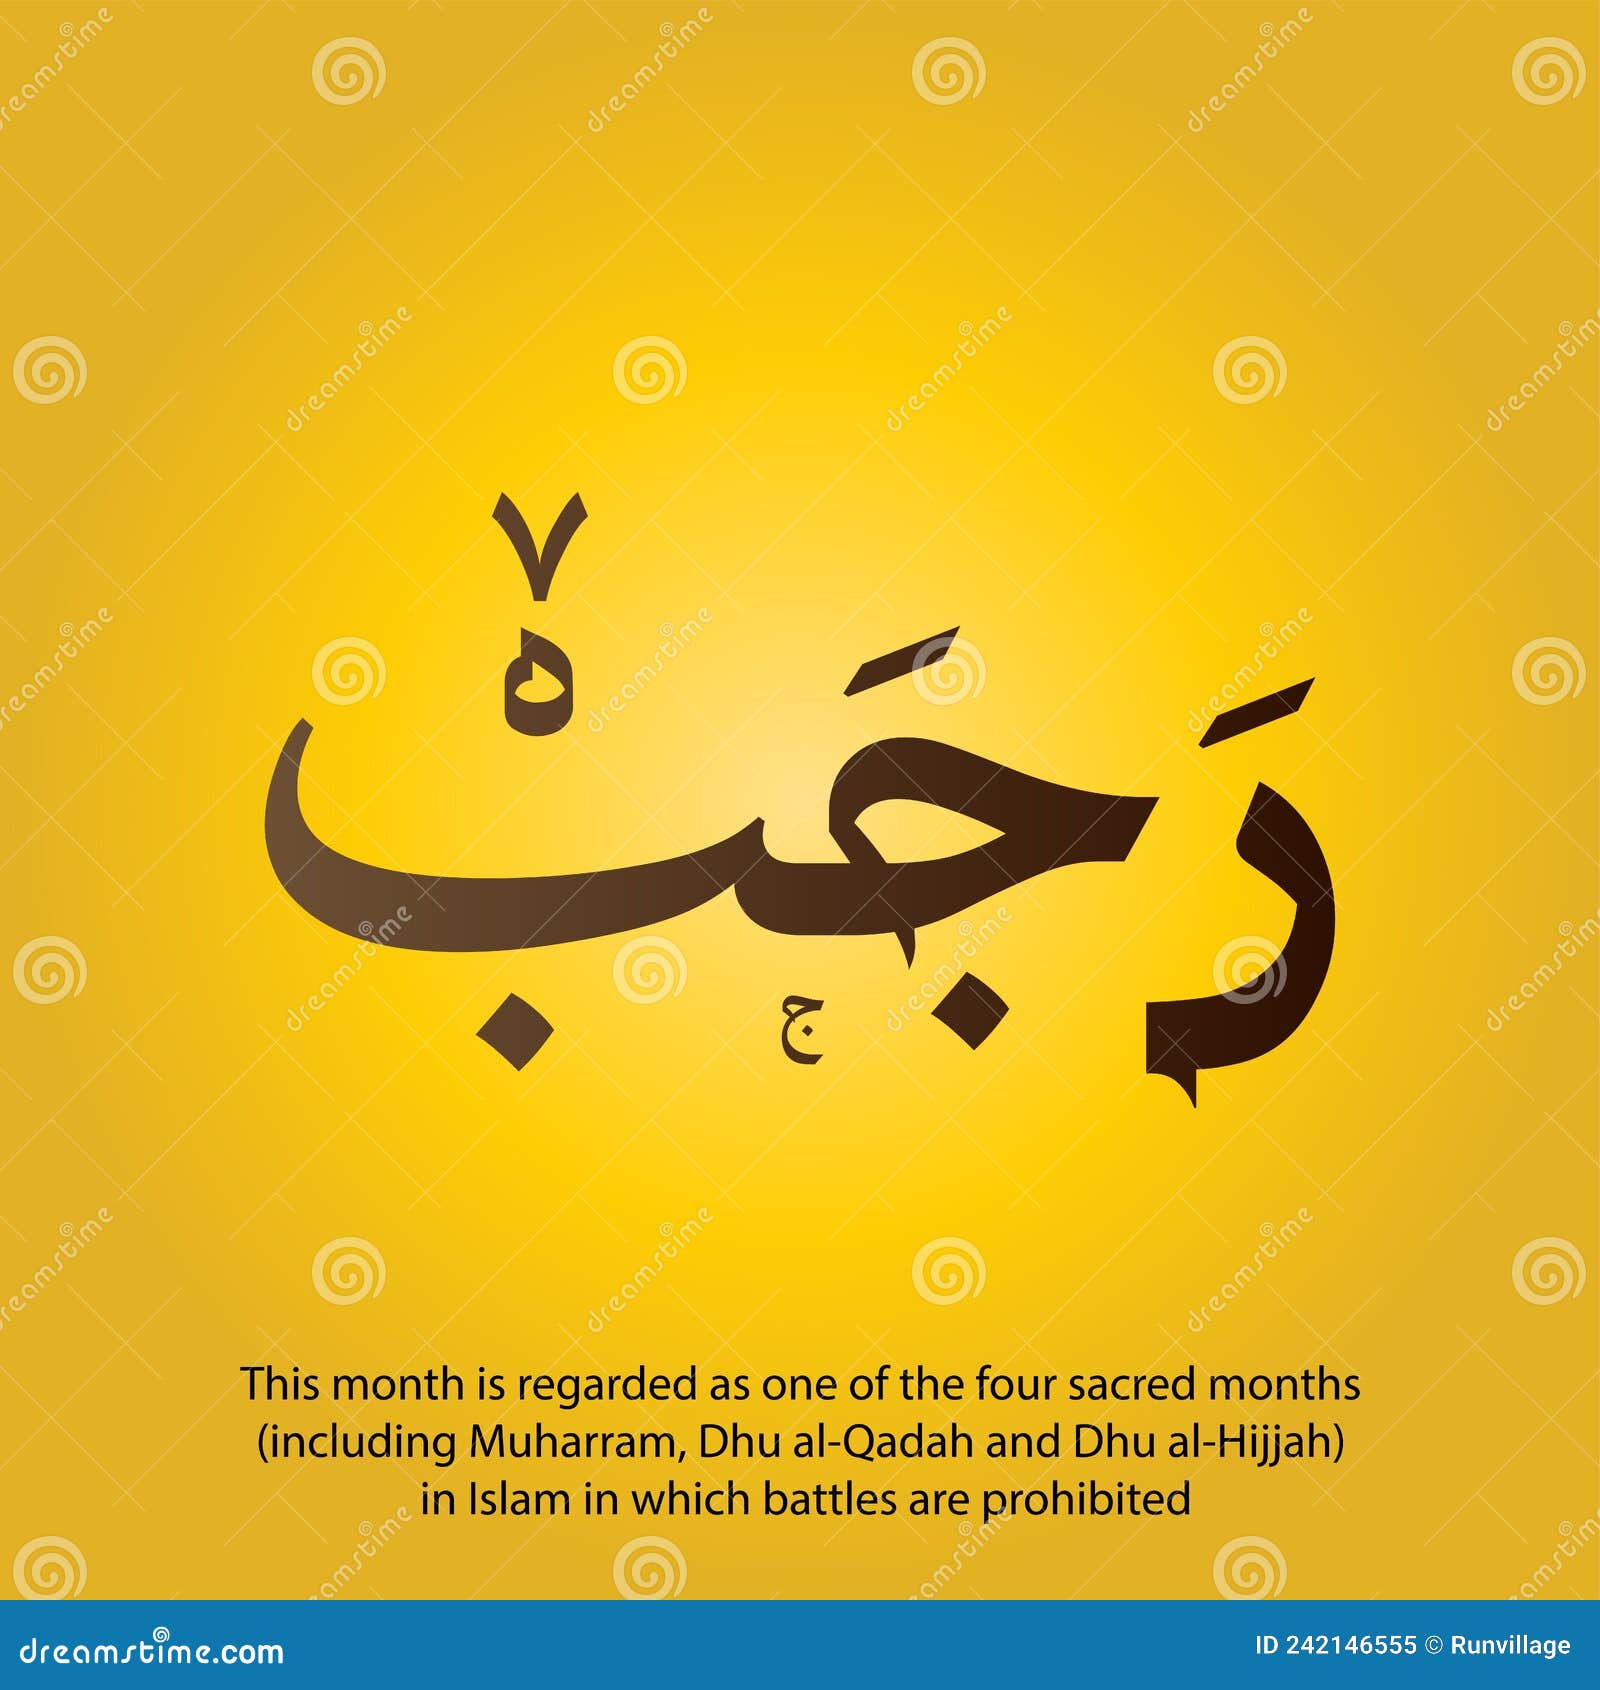 rajab is the seventh month of the islamic calendar. the lexical definition of the classical arabic verb rajaba is